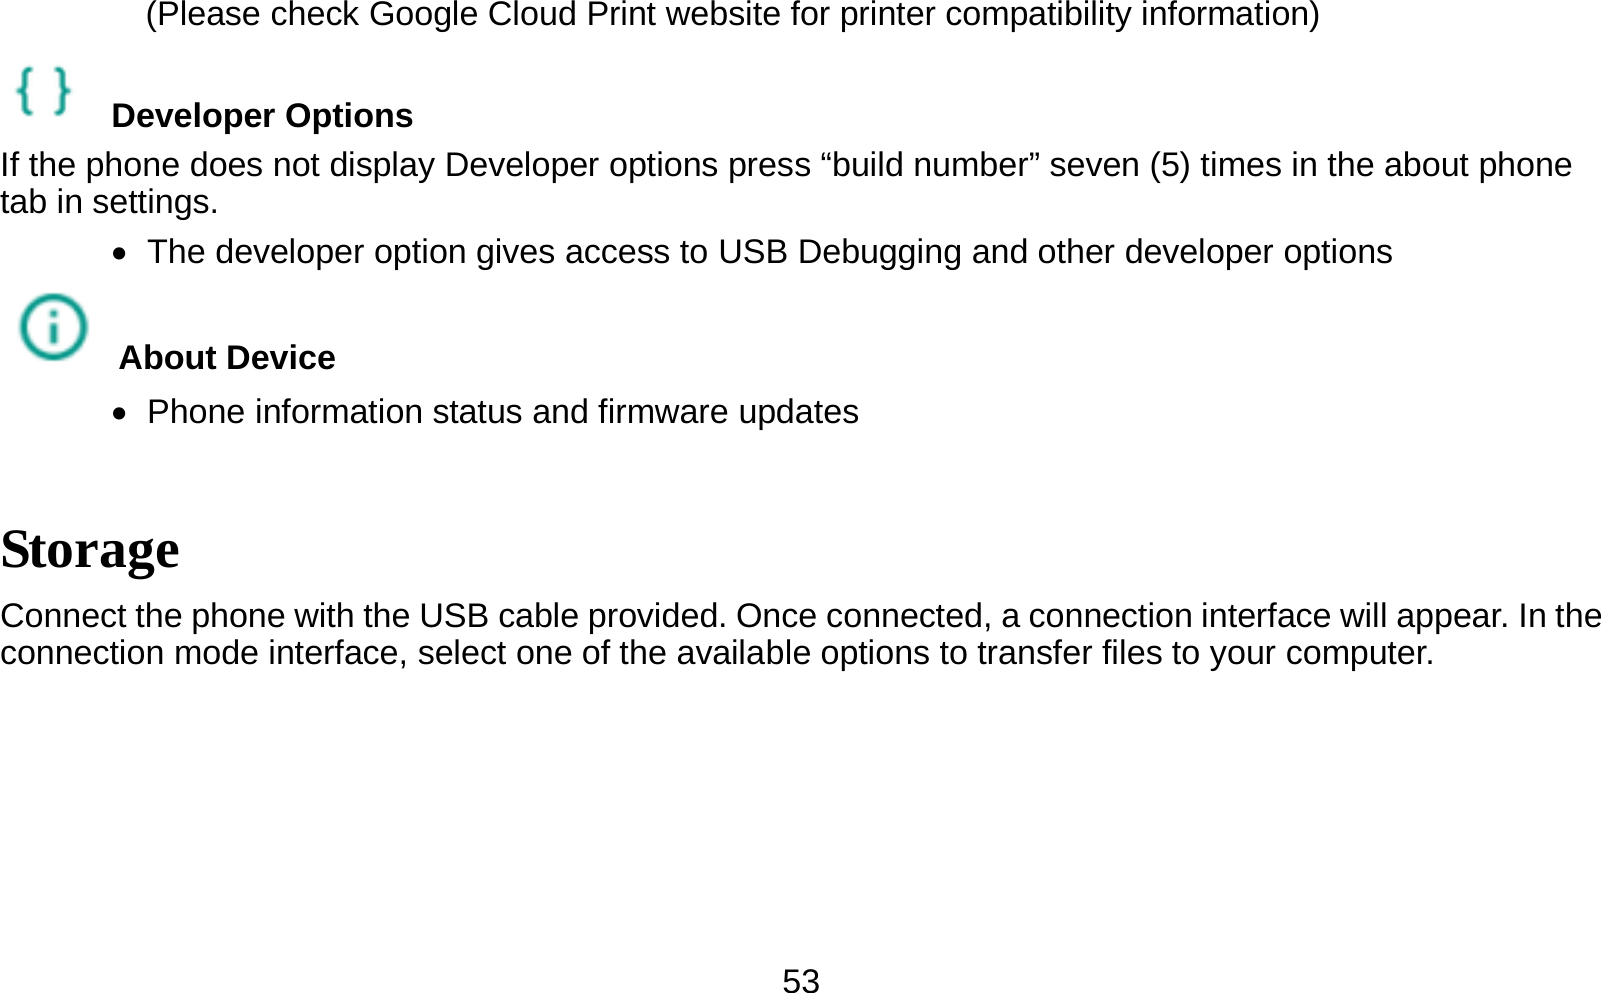   53    (Please check Google Cloud Print website for printer compatibility information)    Developer Options  If the phone does not display Developer options press “build number” seven (5) times in the about phone tab in settings.      The developer option gives access to USB Debugging and other developer options  About Device     Phone information status and firmware updates Storage Connect the phone with the USB cable provided. Once connected, a connection interface will appear. In the connection mode interface, select one of the available options to transfer files to your computer.   